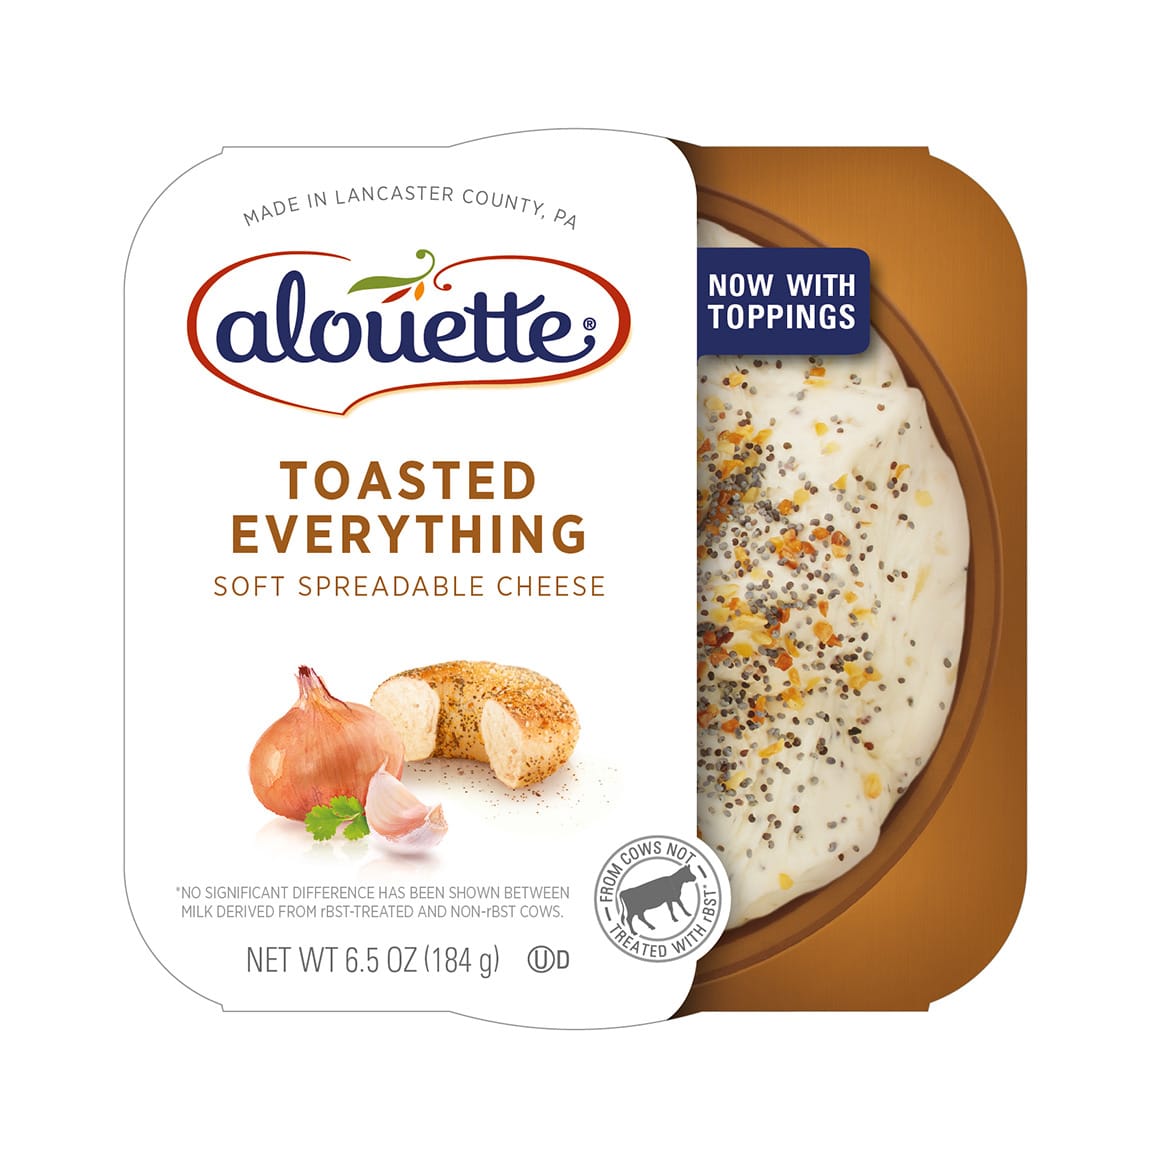 Alouette Toasted Everything soft spreadable cheese packaging